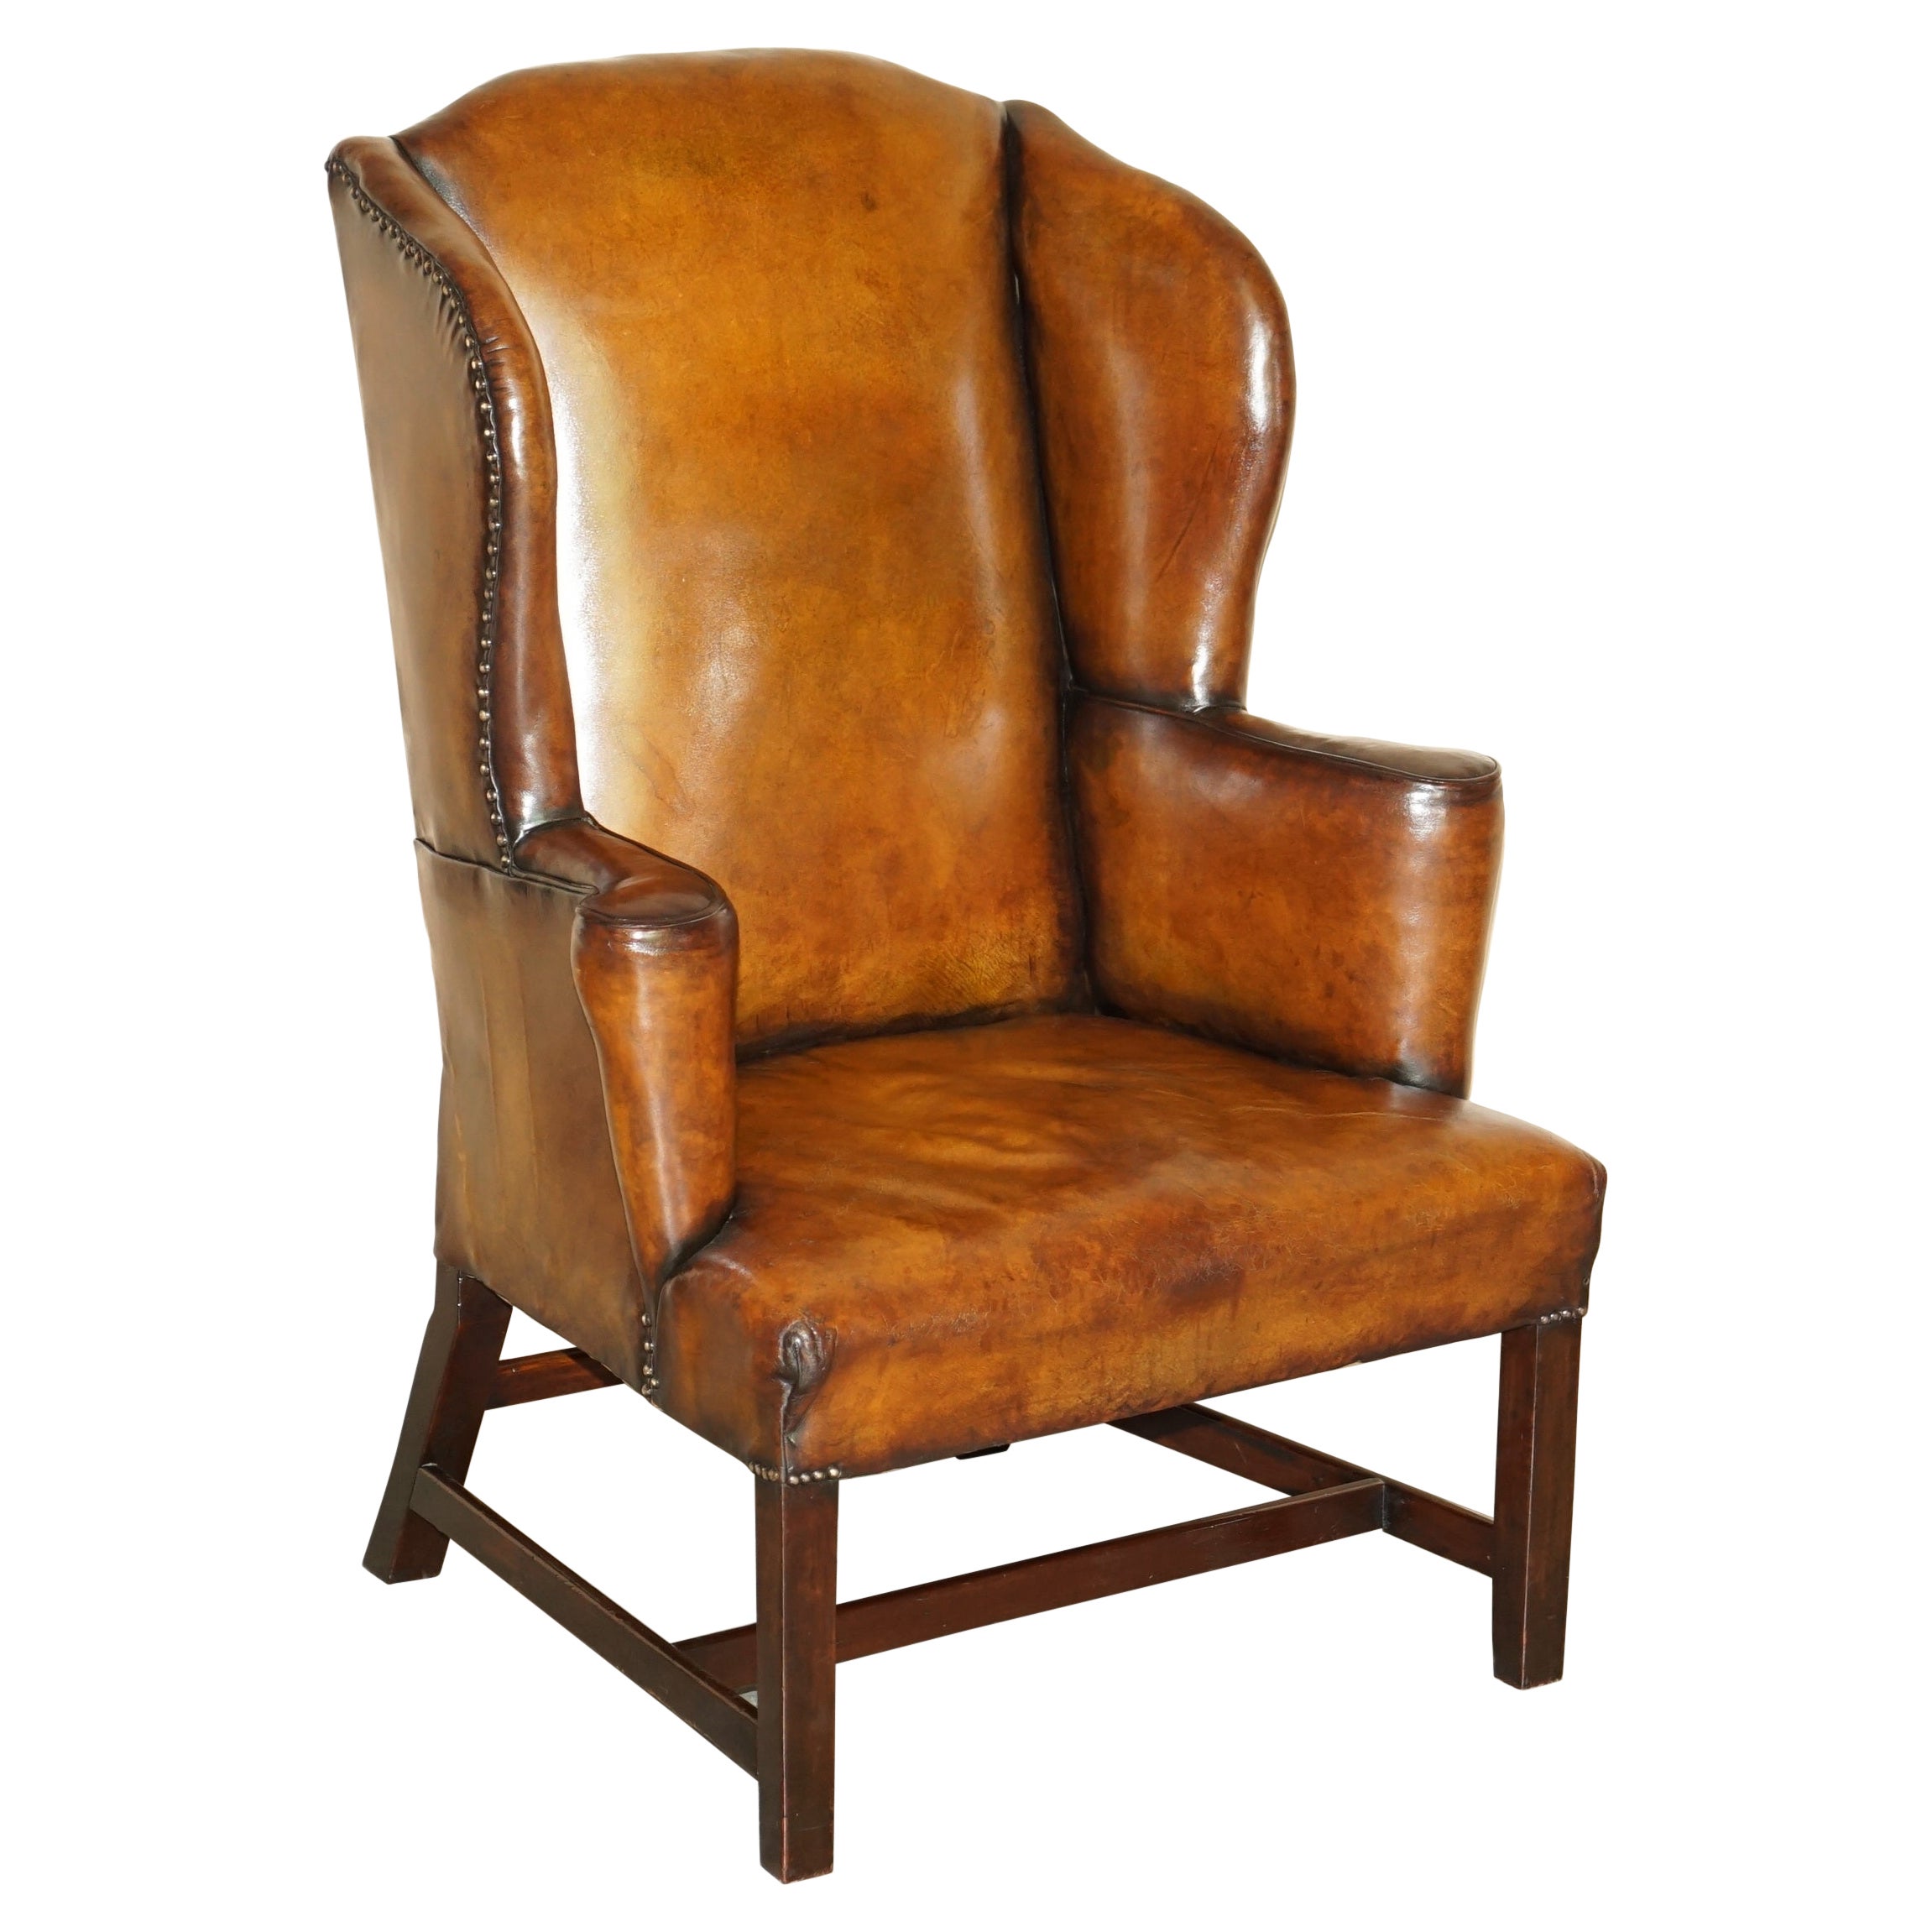 Antique Restored George II Period circa 1760 Wingback Brown Leather Armchair For Sale